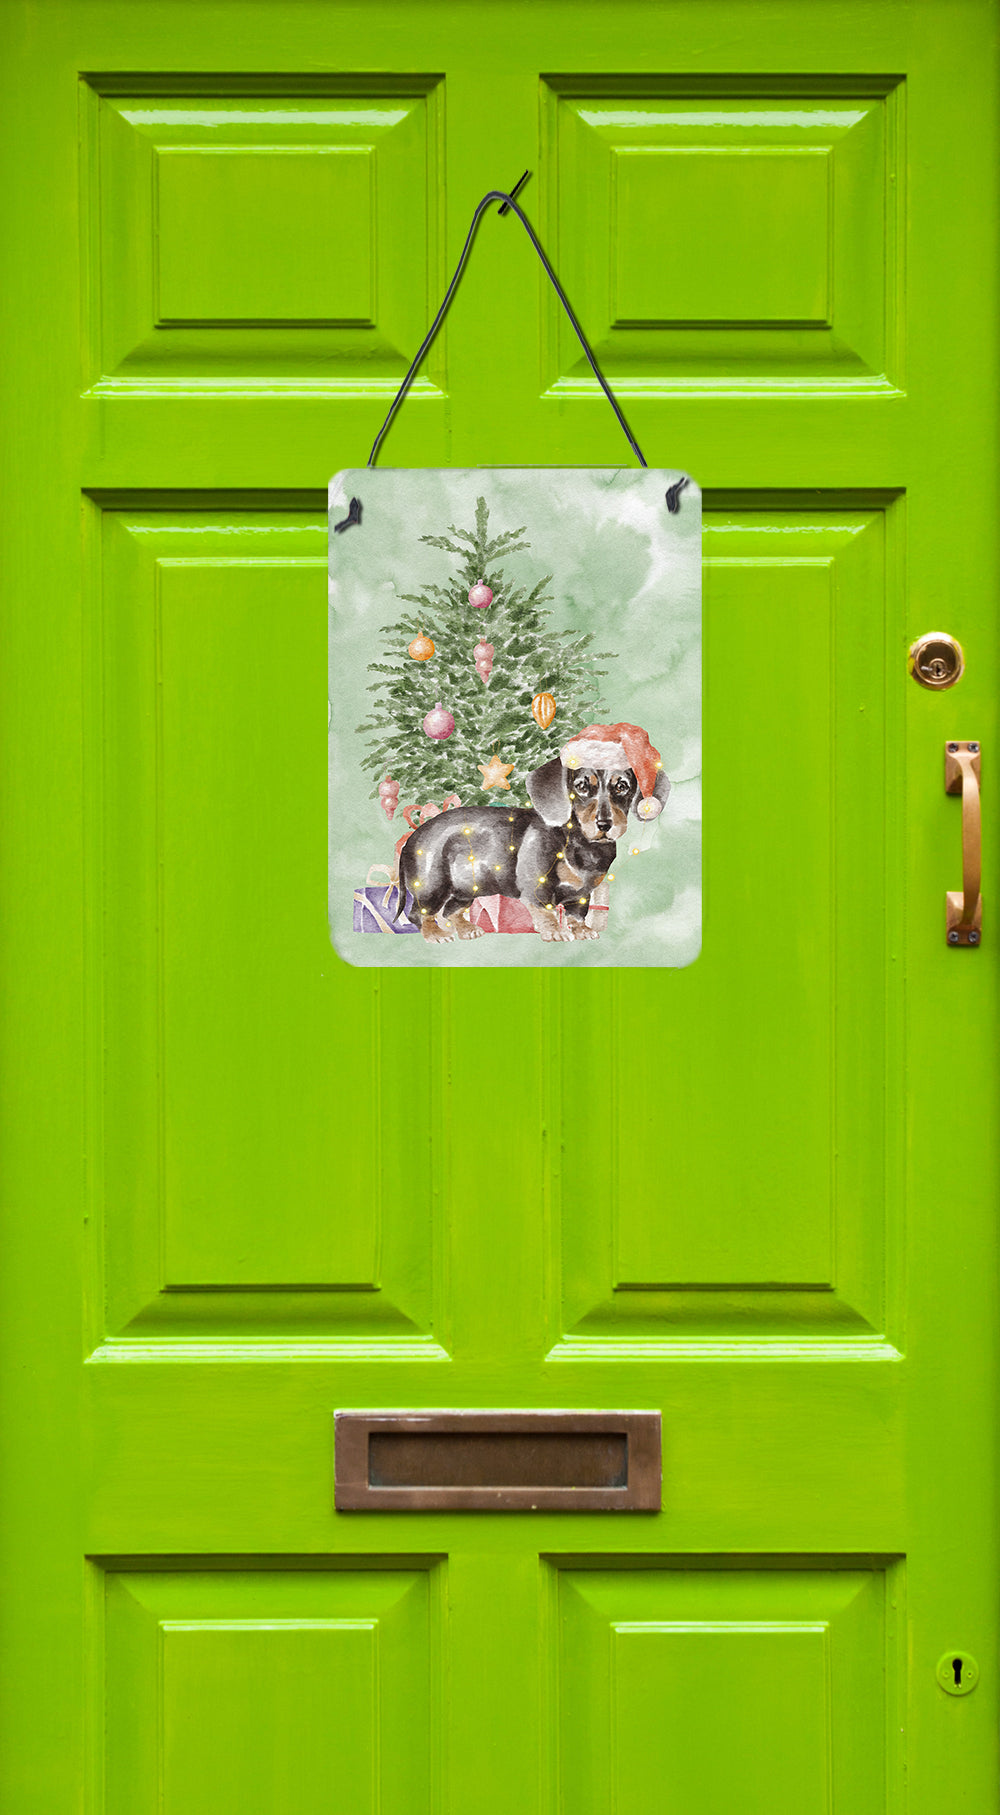 Buy this Christmas Dachshund Black Tan Puppy Wall or Door Hanging Prints